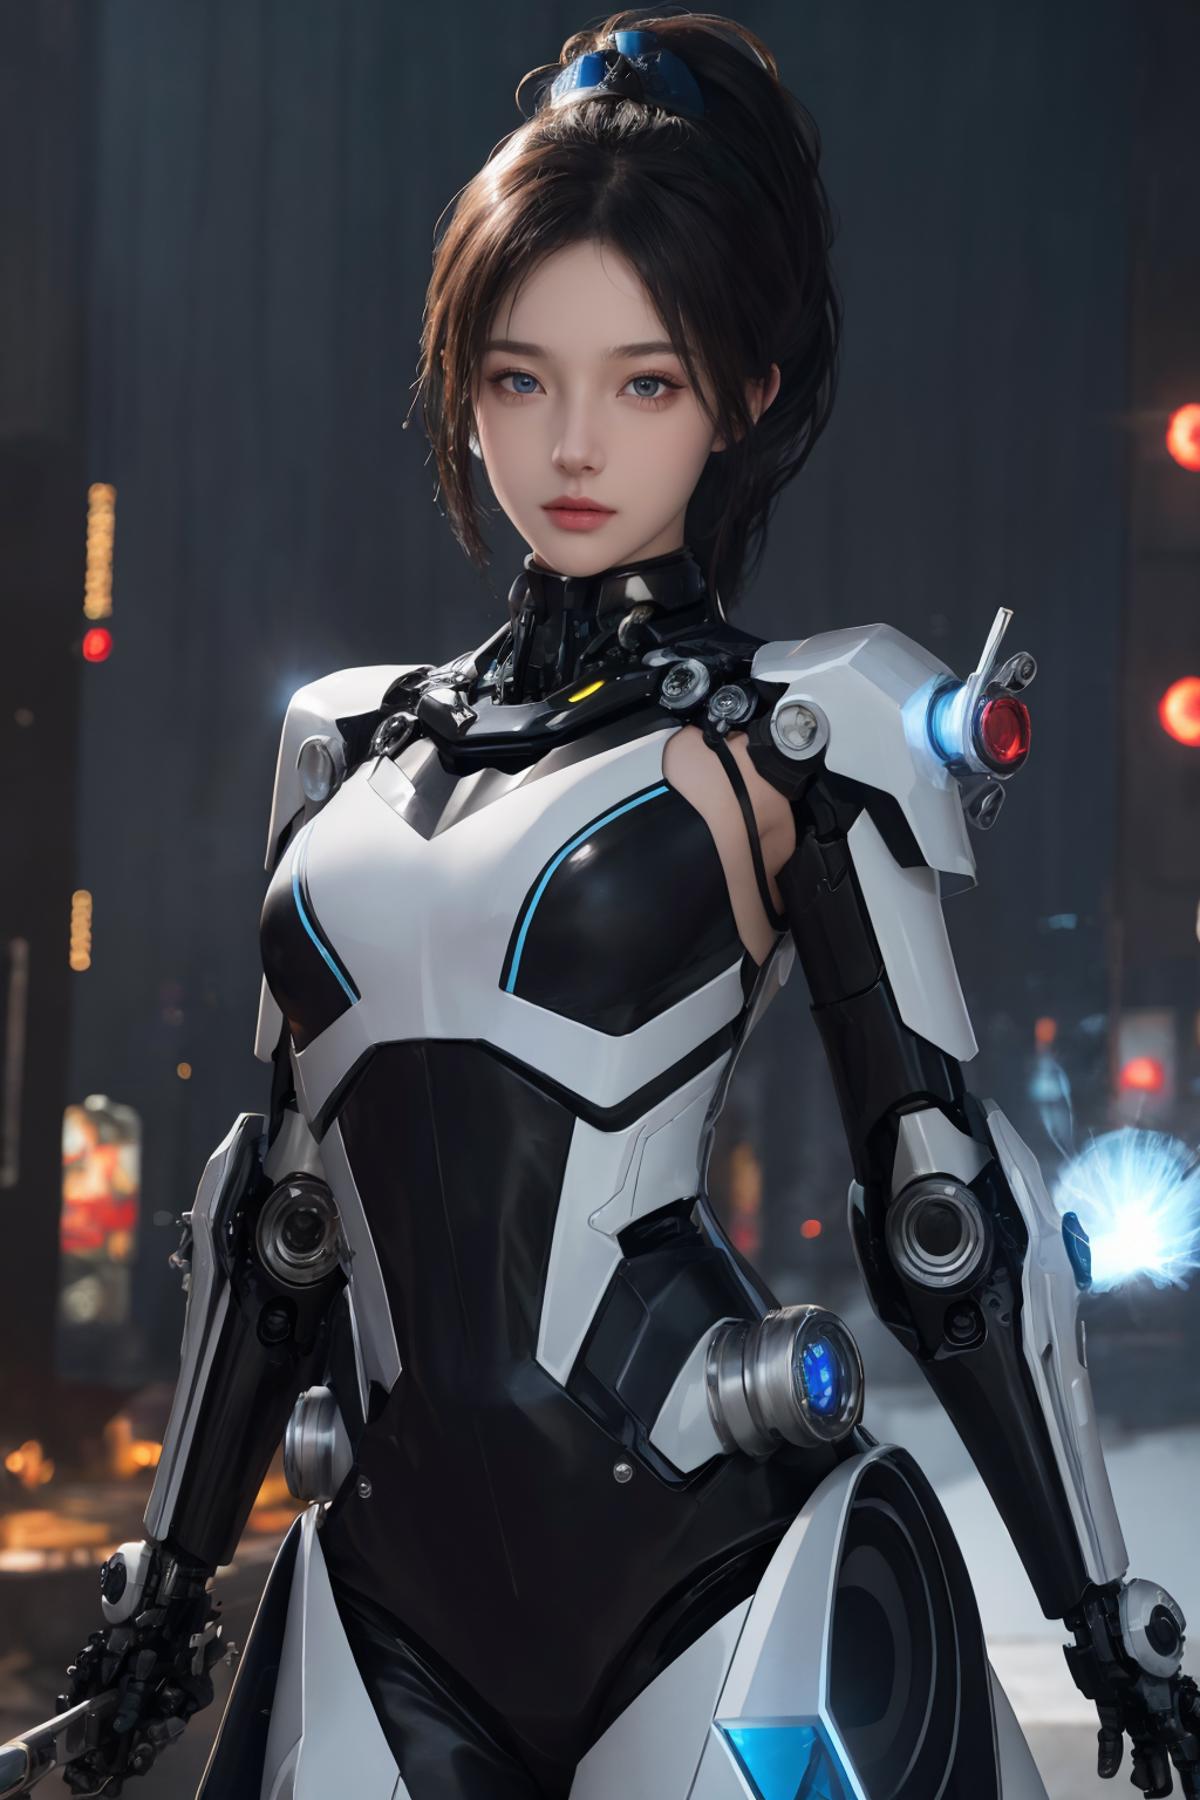 AI model image by 2195074809481